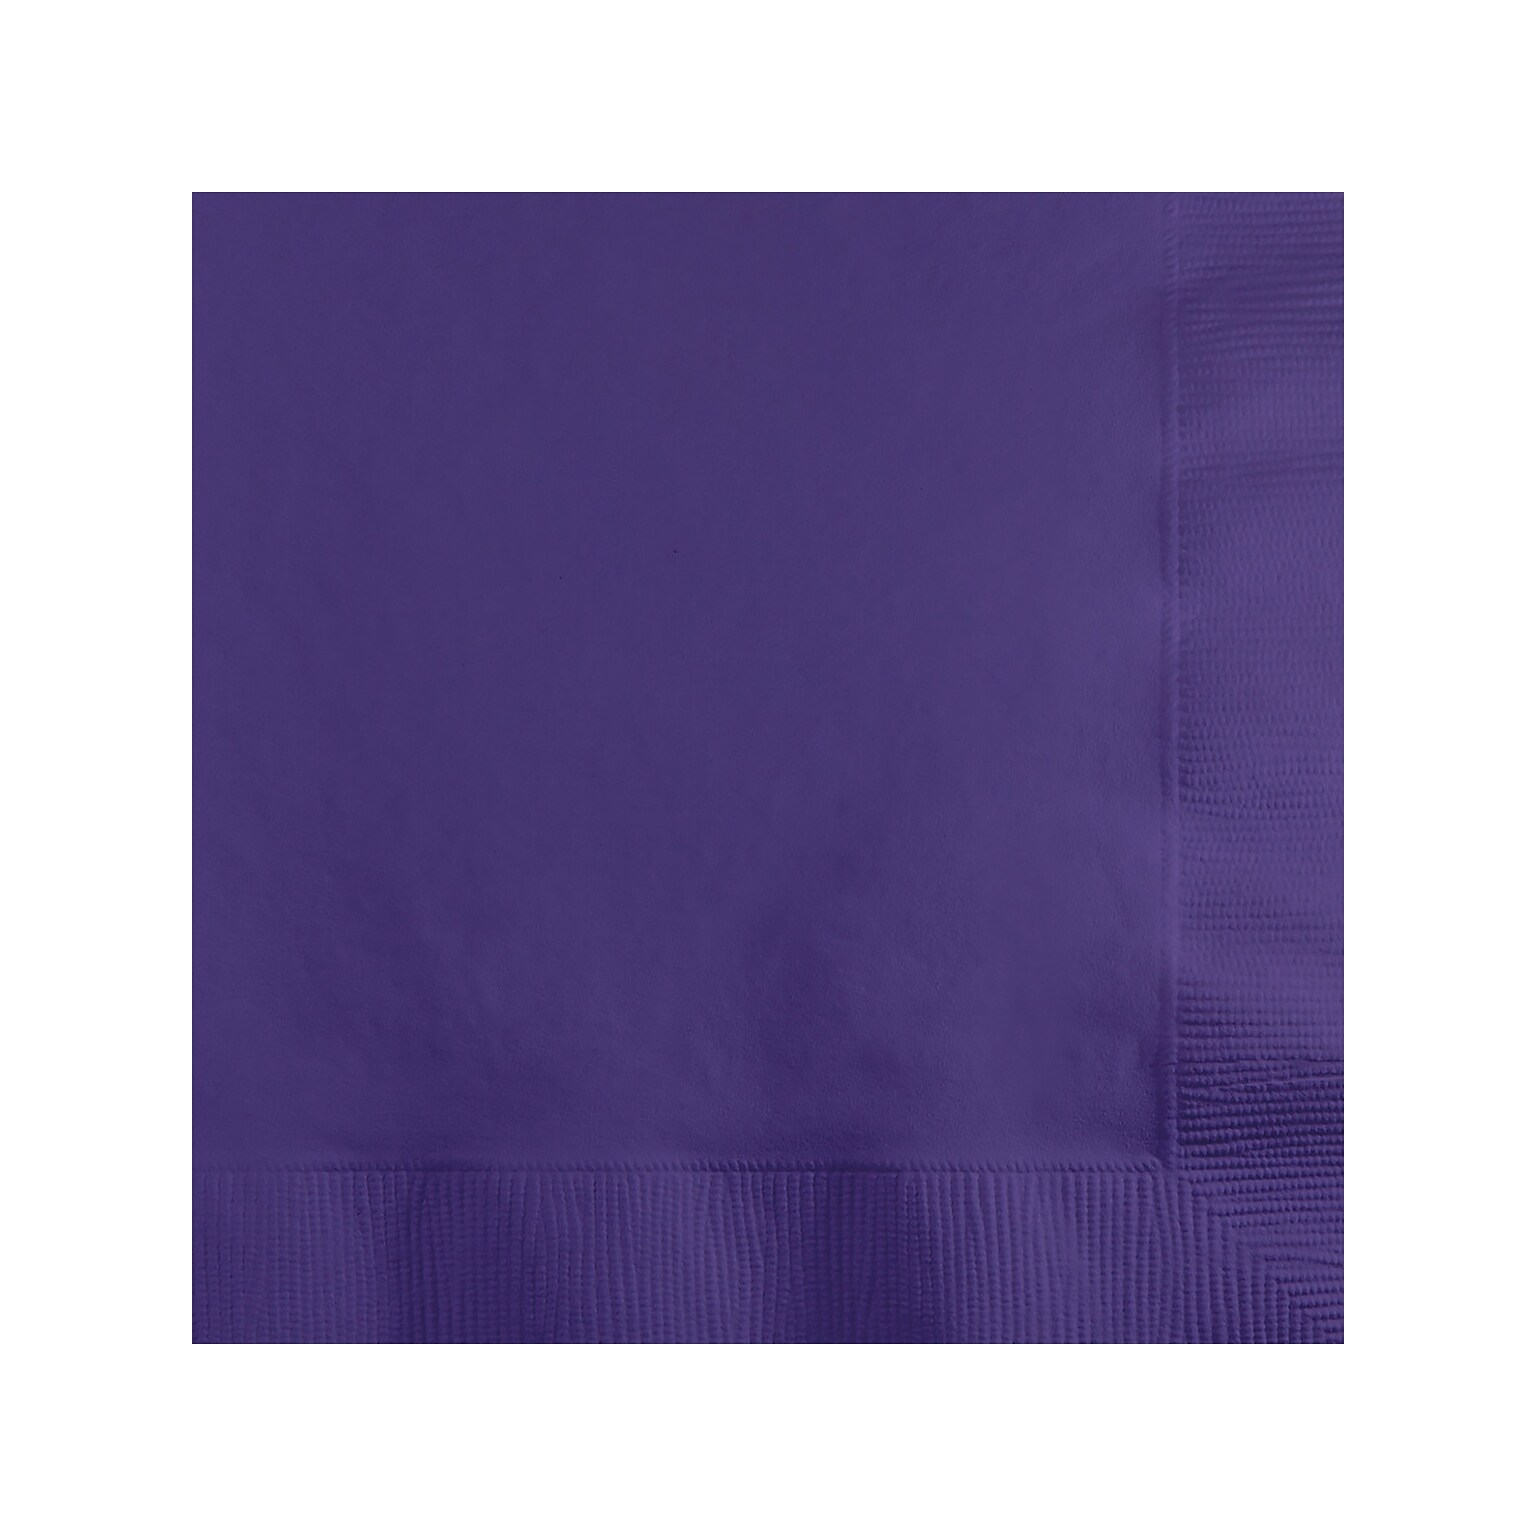 Creative Converting Touch of Color Beverage Napkin, 2-ply, Purple, 150 Napkins/Pack (DTC139371154BNP)